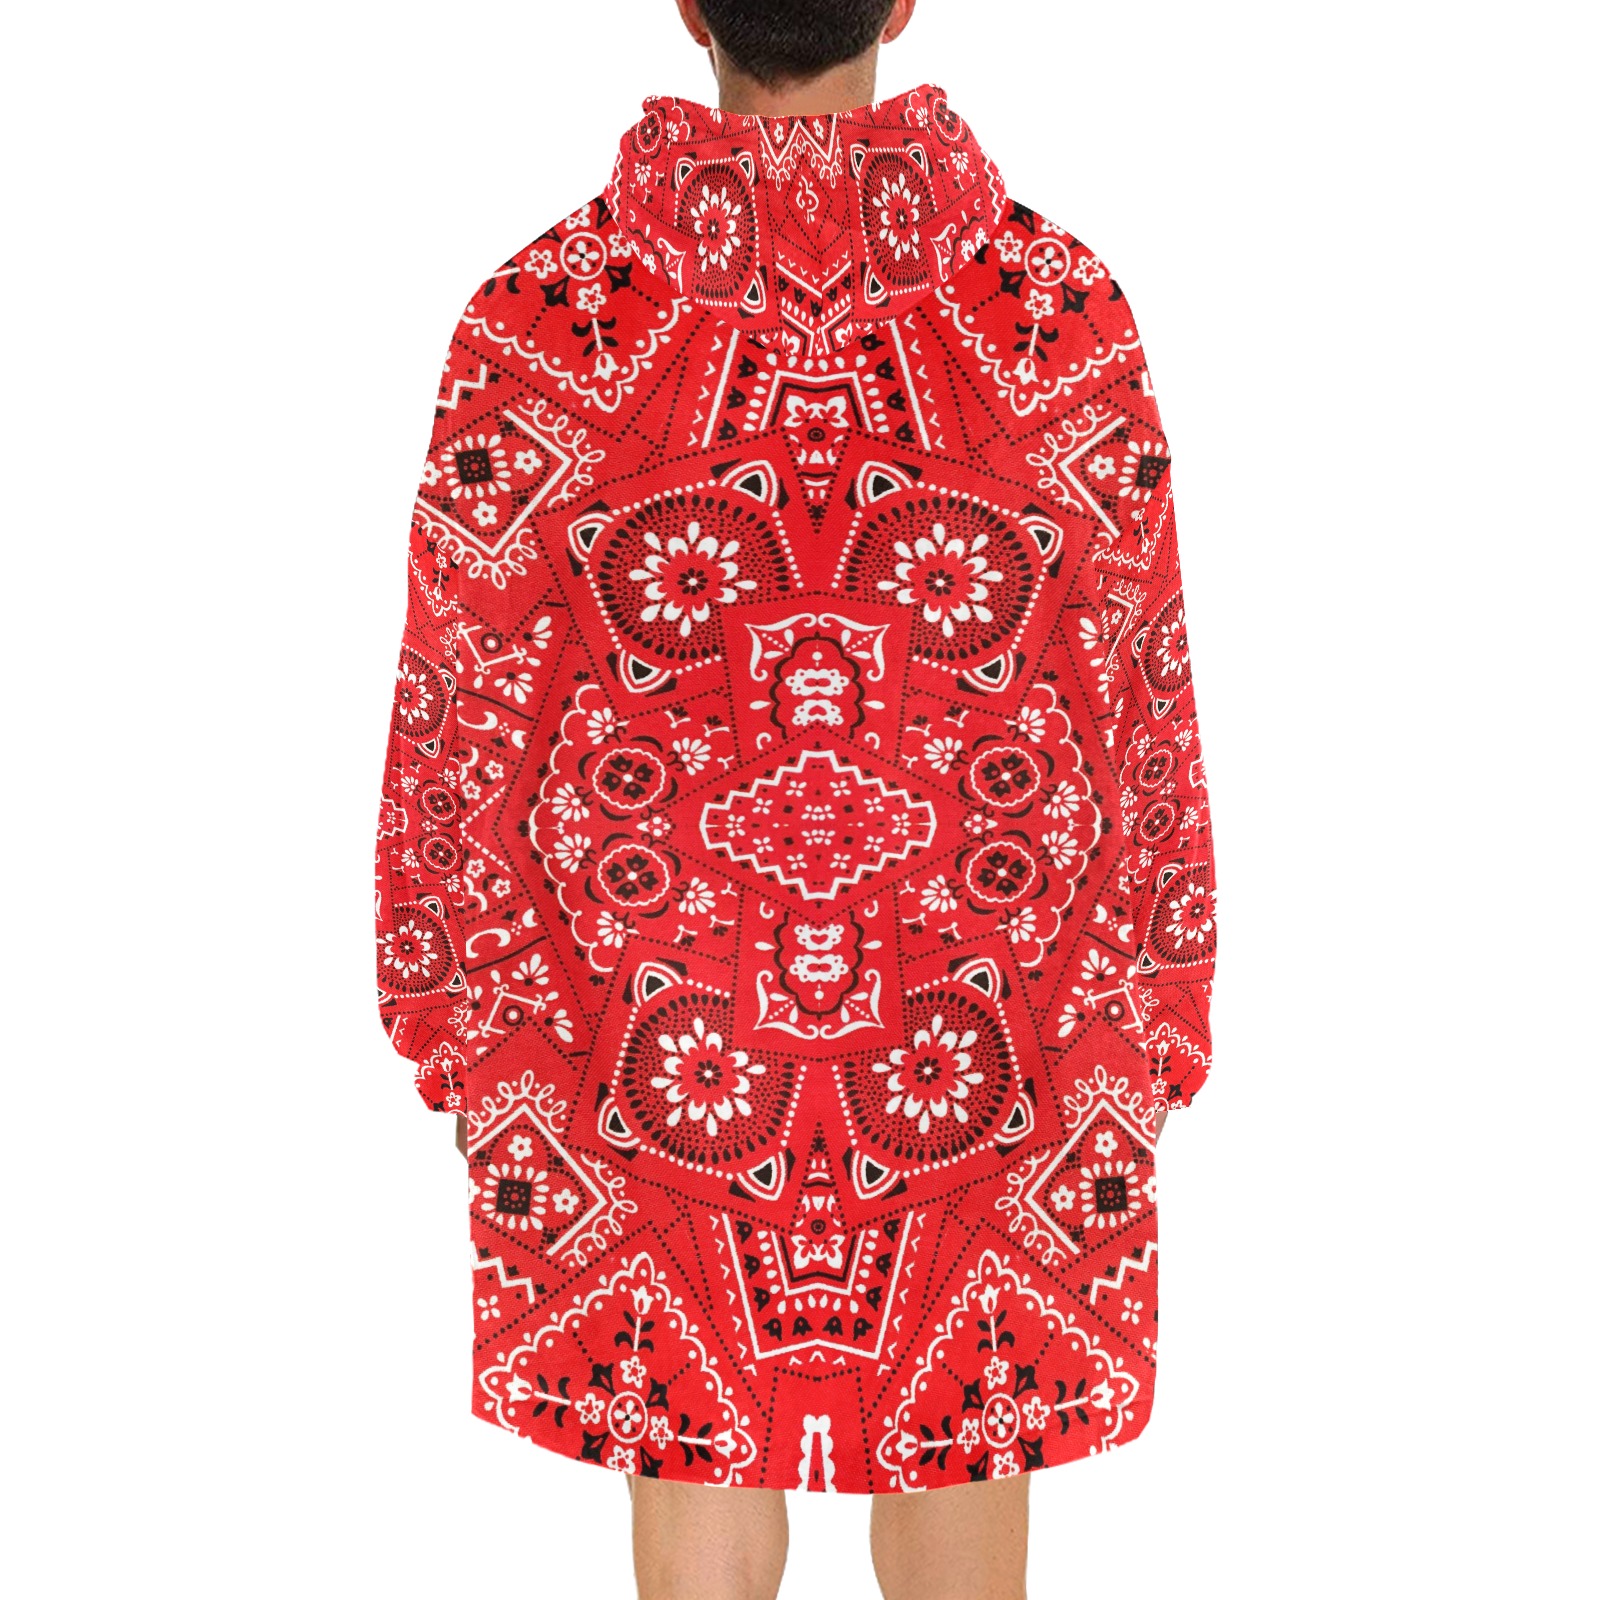 Red Bandana Squares / White Cuff Blanket Hoodie for Men